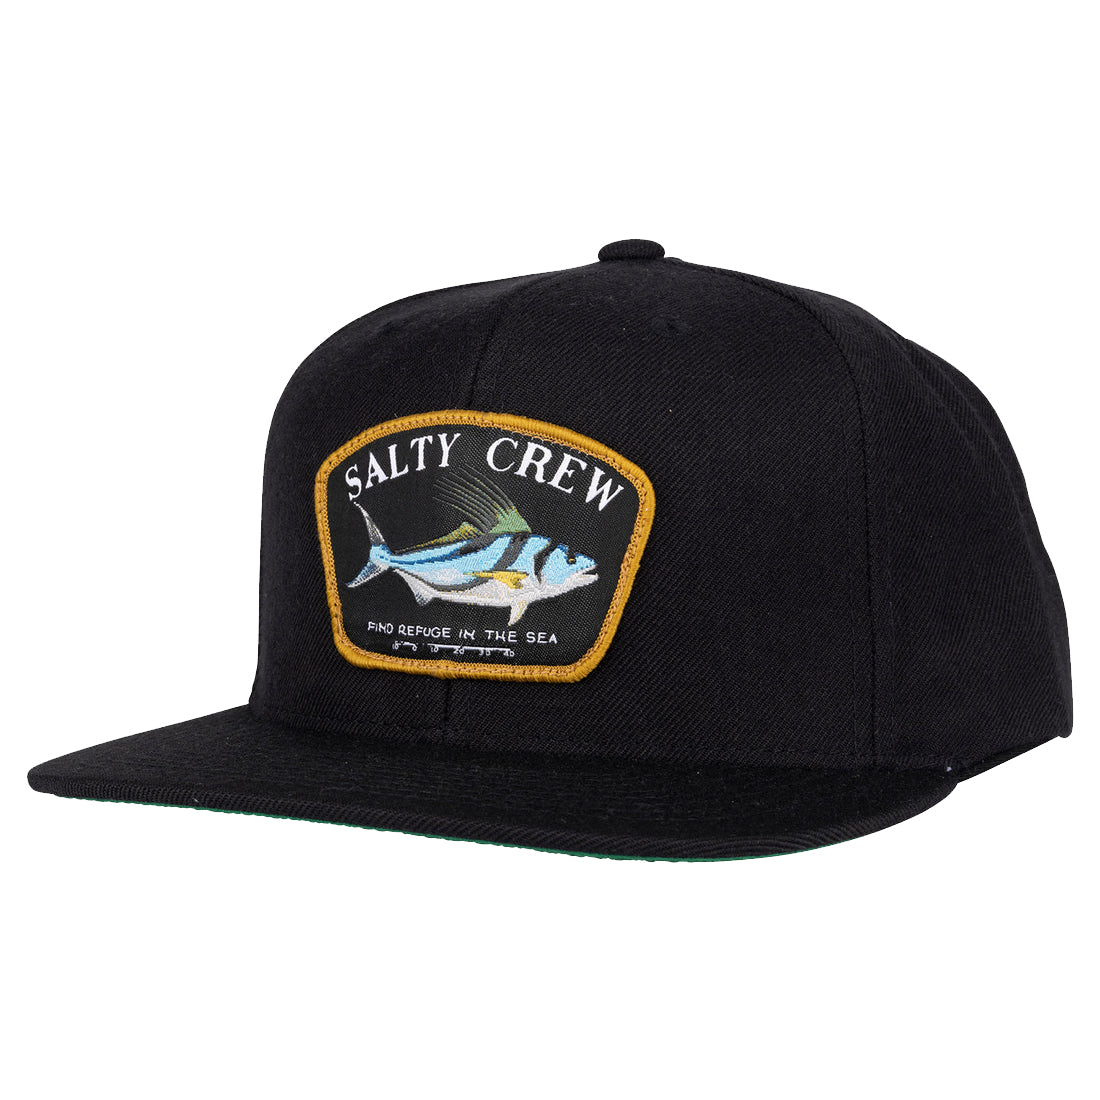 Salty Crew Rooster 6 Panel Hat Black OS